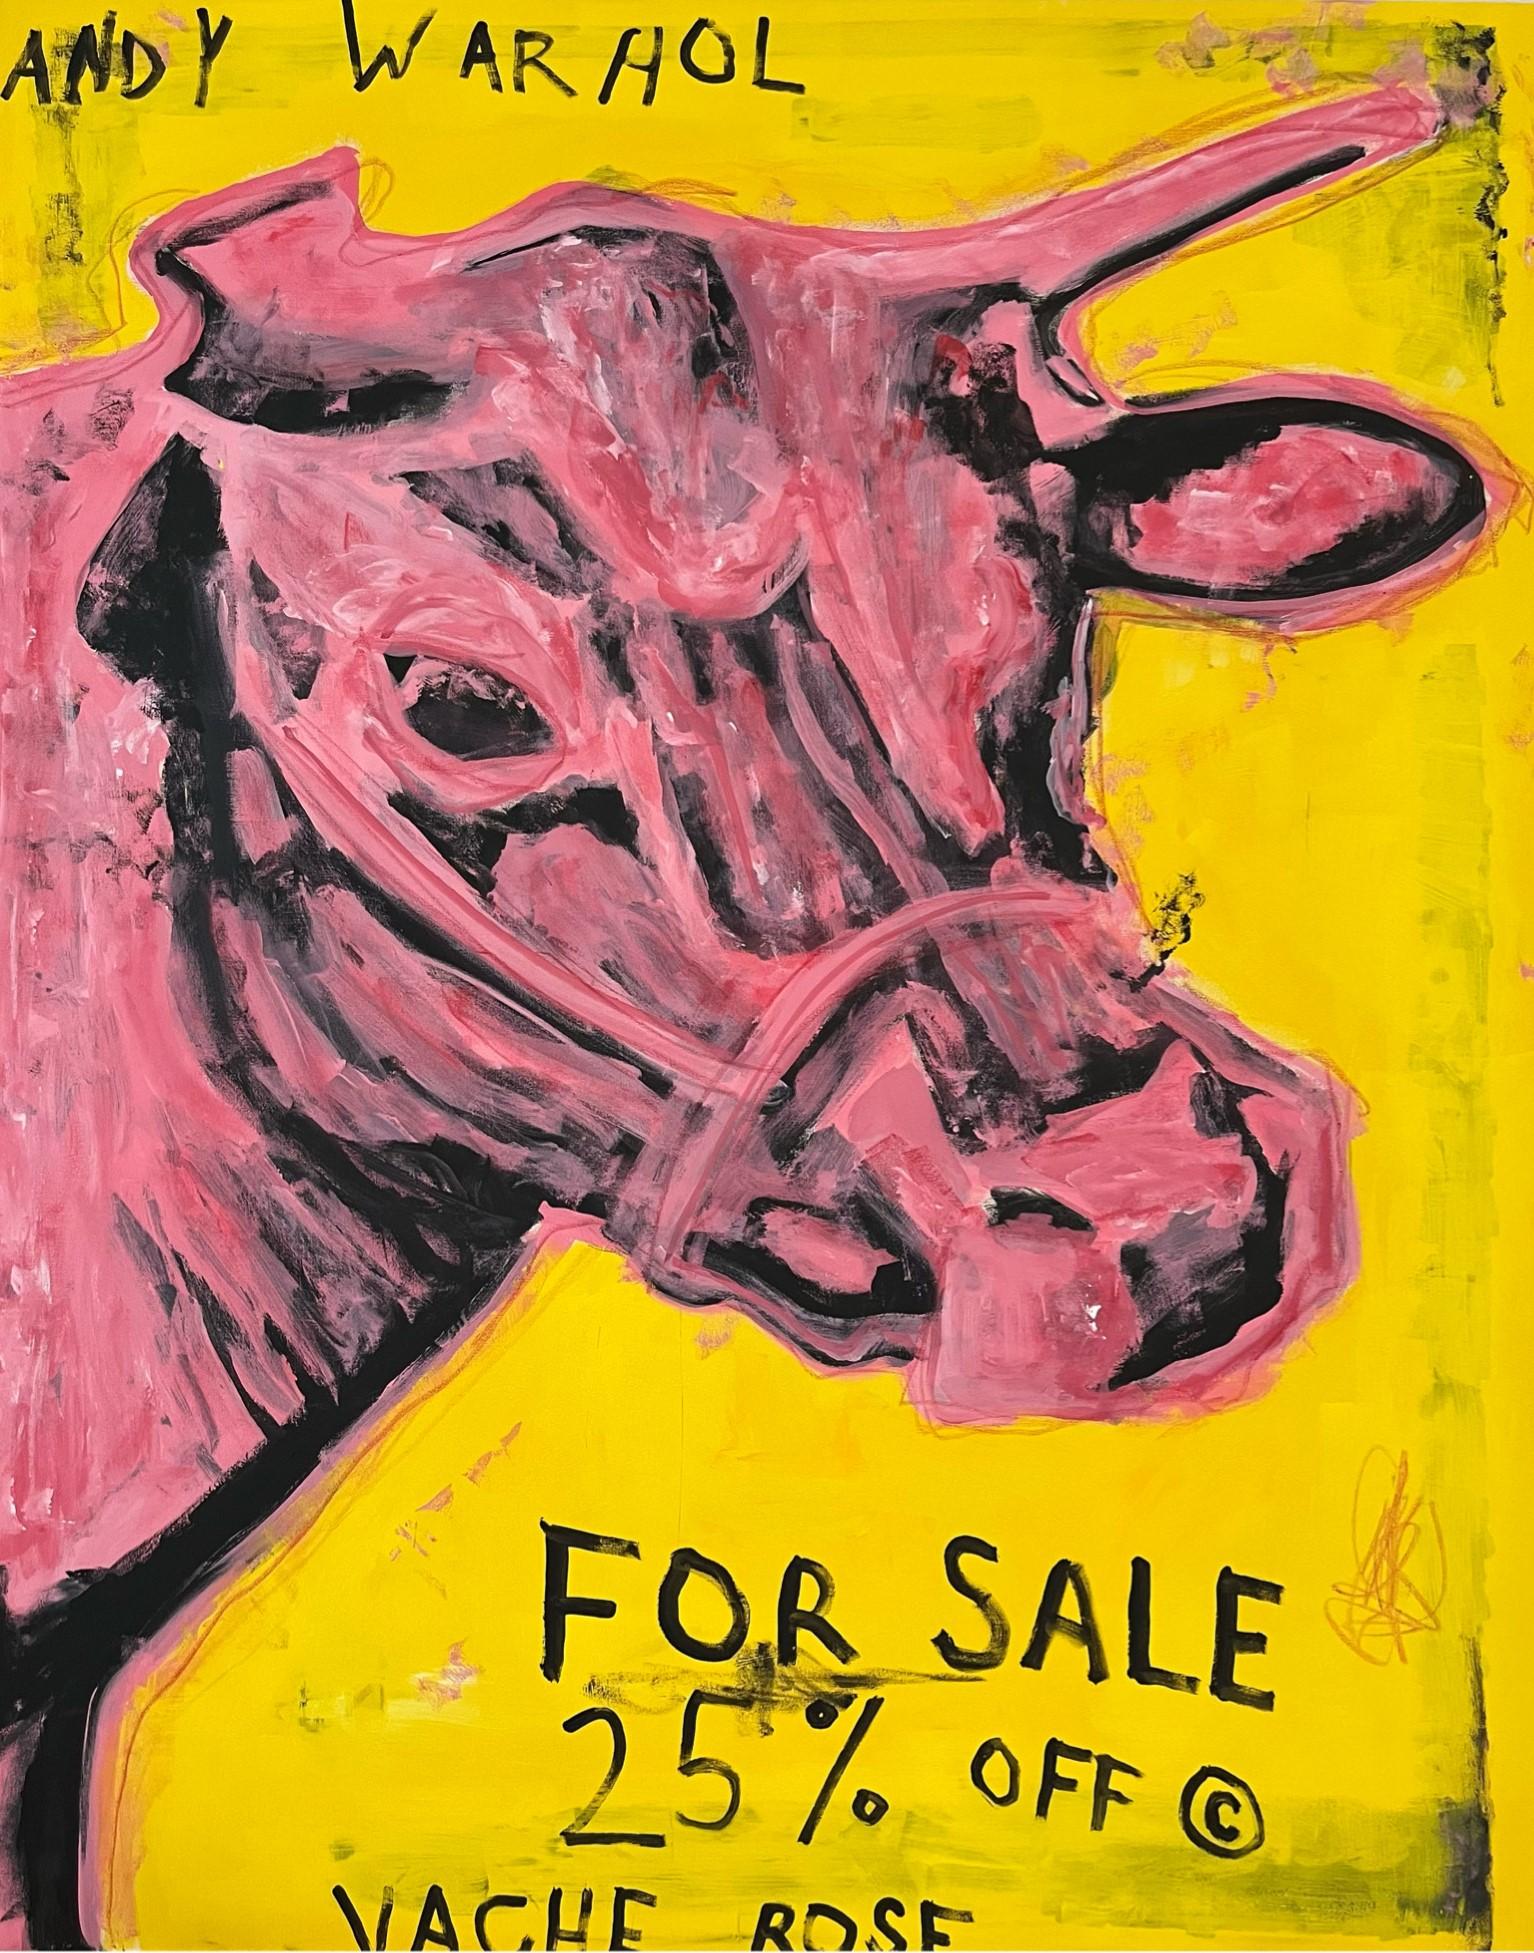 Tyler Casey Animal Painting - "Cow" Contemporary Pink and Yellow Abstract Pop Art Homage to Andy Warhol